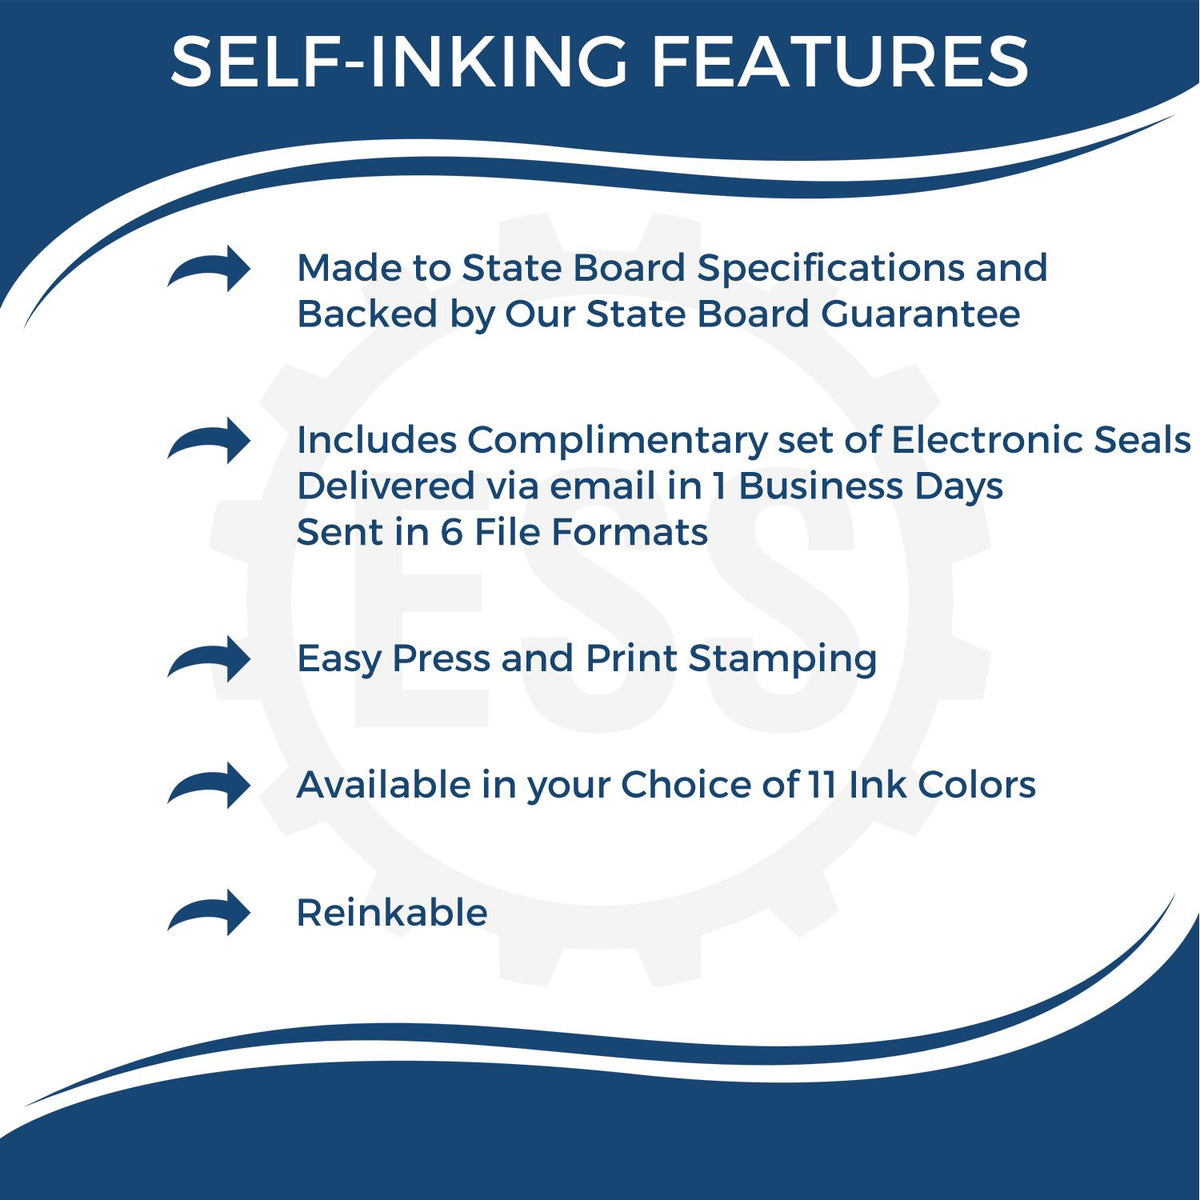 A picture of an infographic highlighting the selling points for the Self-Inking Rectangular North Dakota Notary Stamp